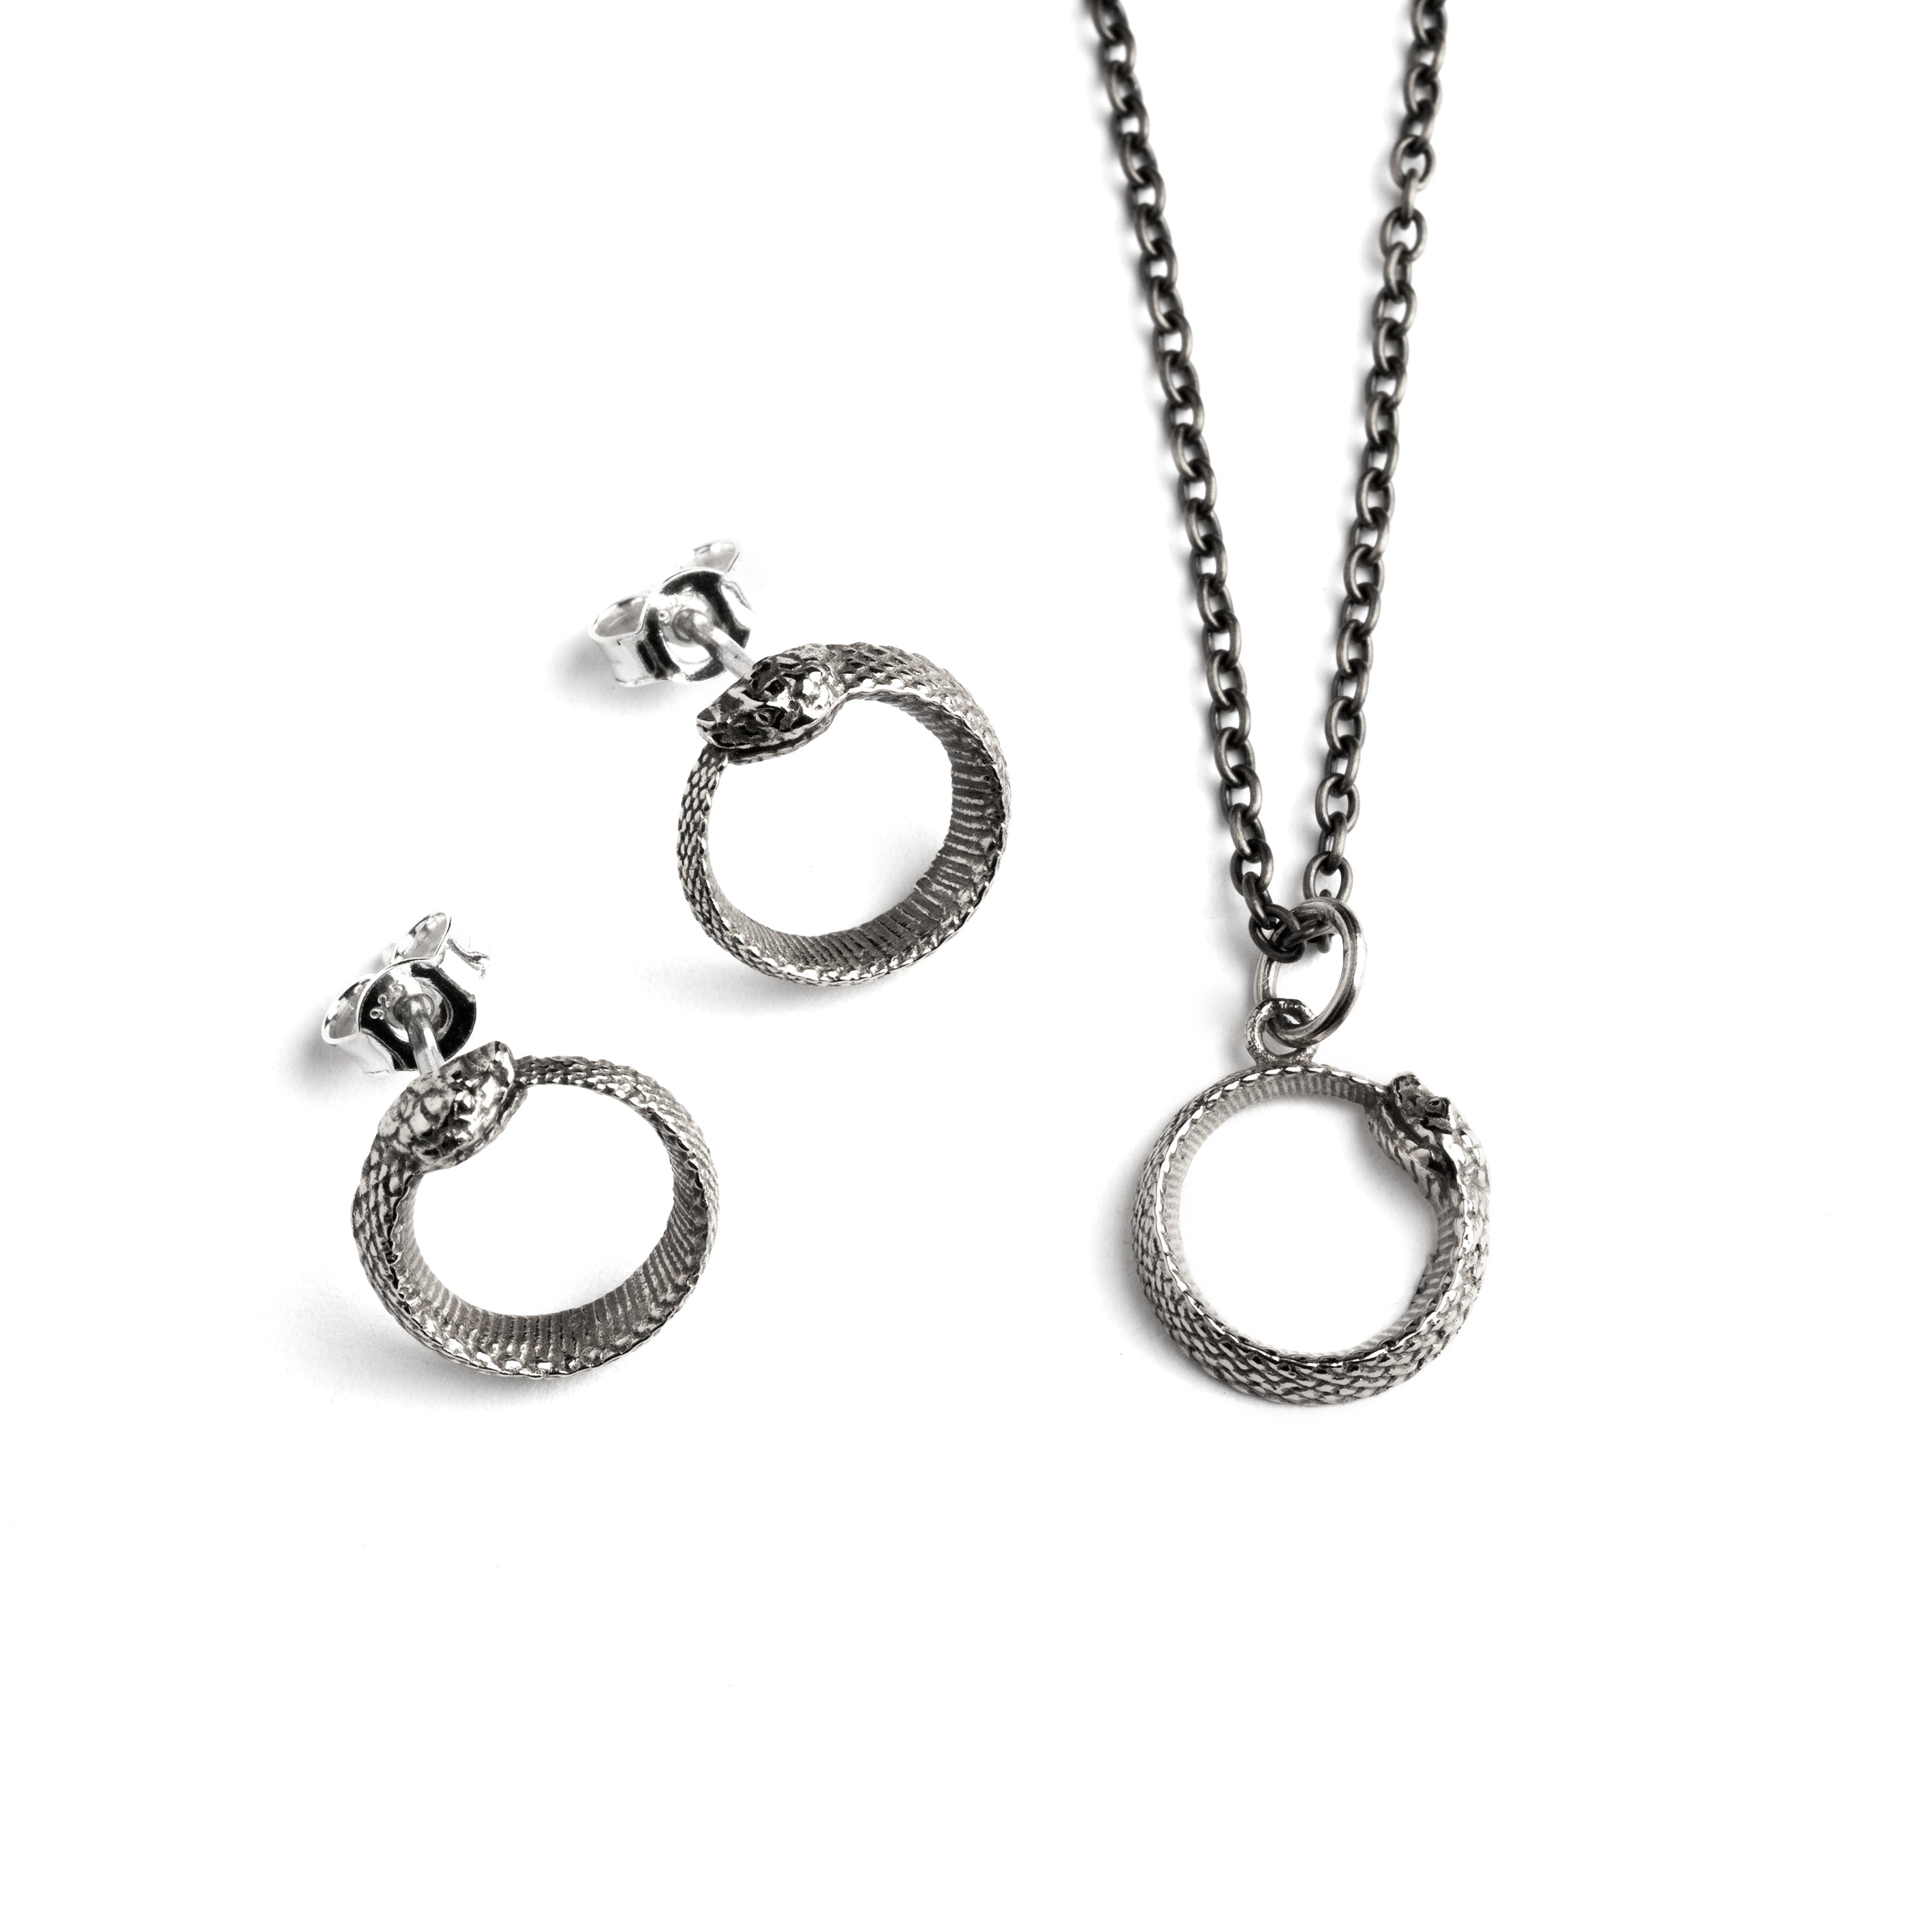 Ouroboros Silver Ear Studs and a matching Ouroboros charm necklace